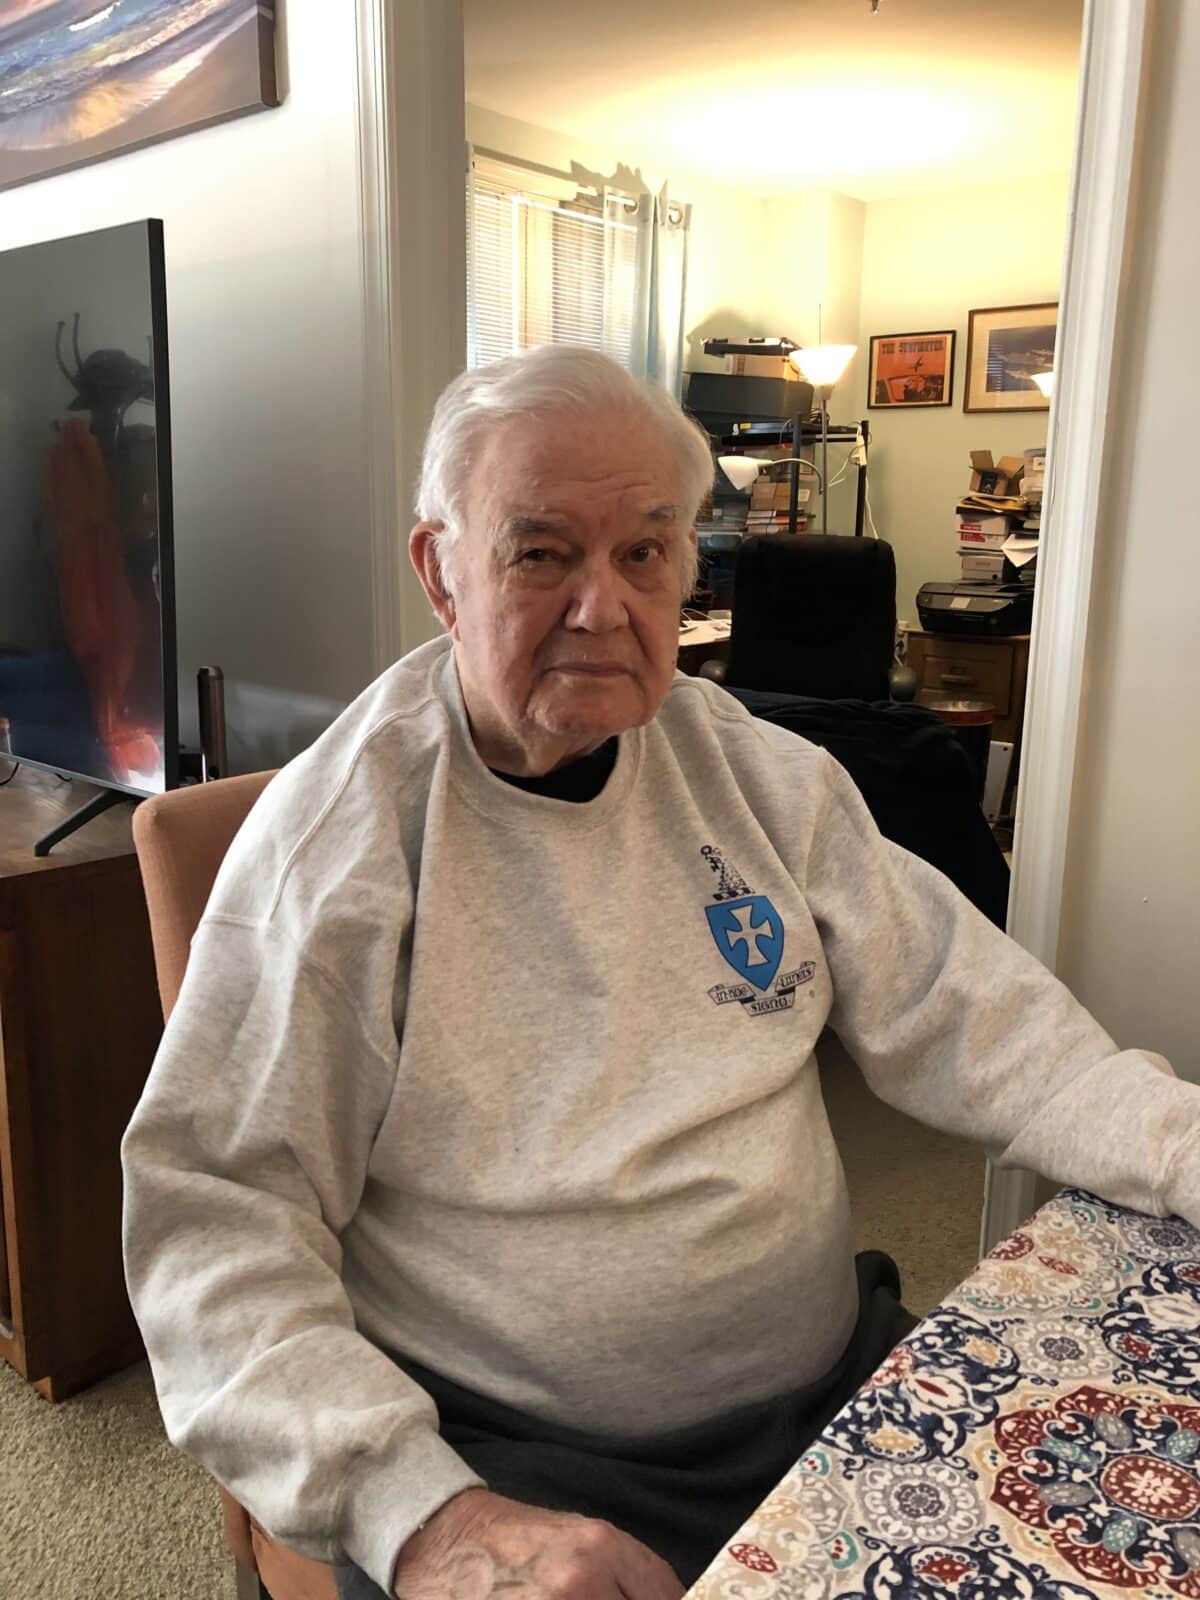 Jack Jeffords is a resident at The Arbors Independent Living